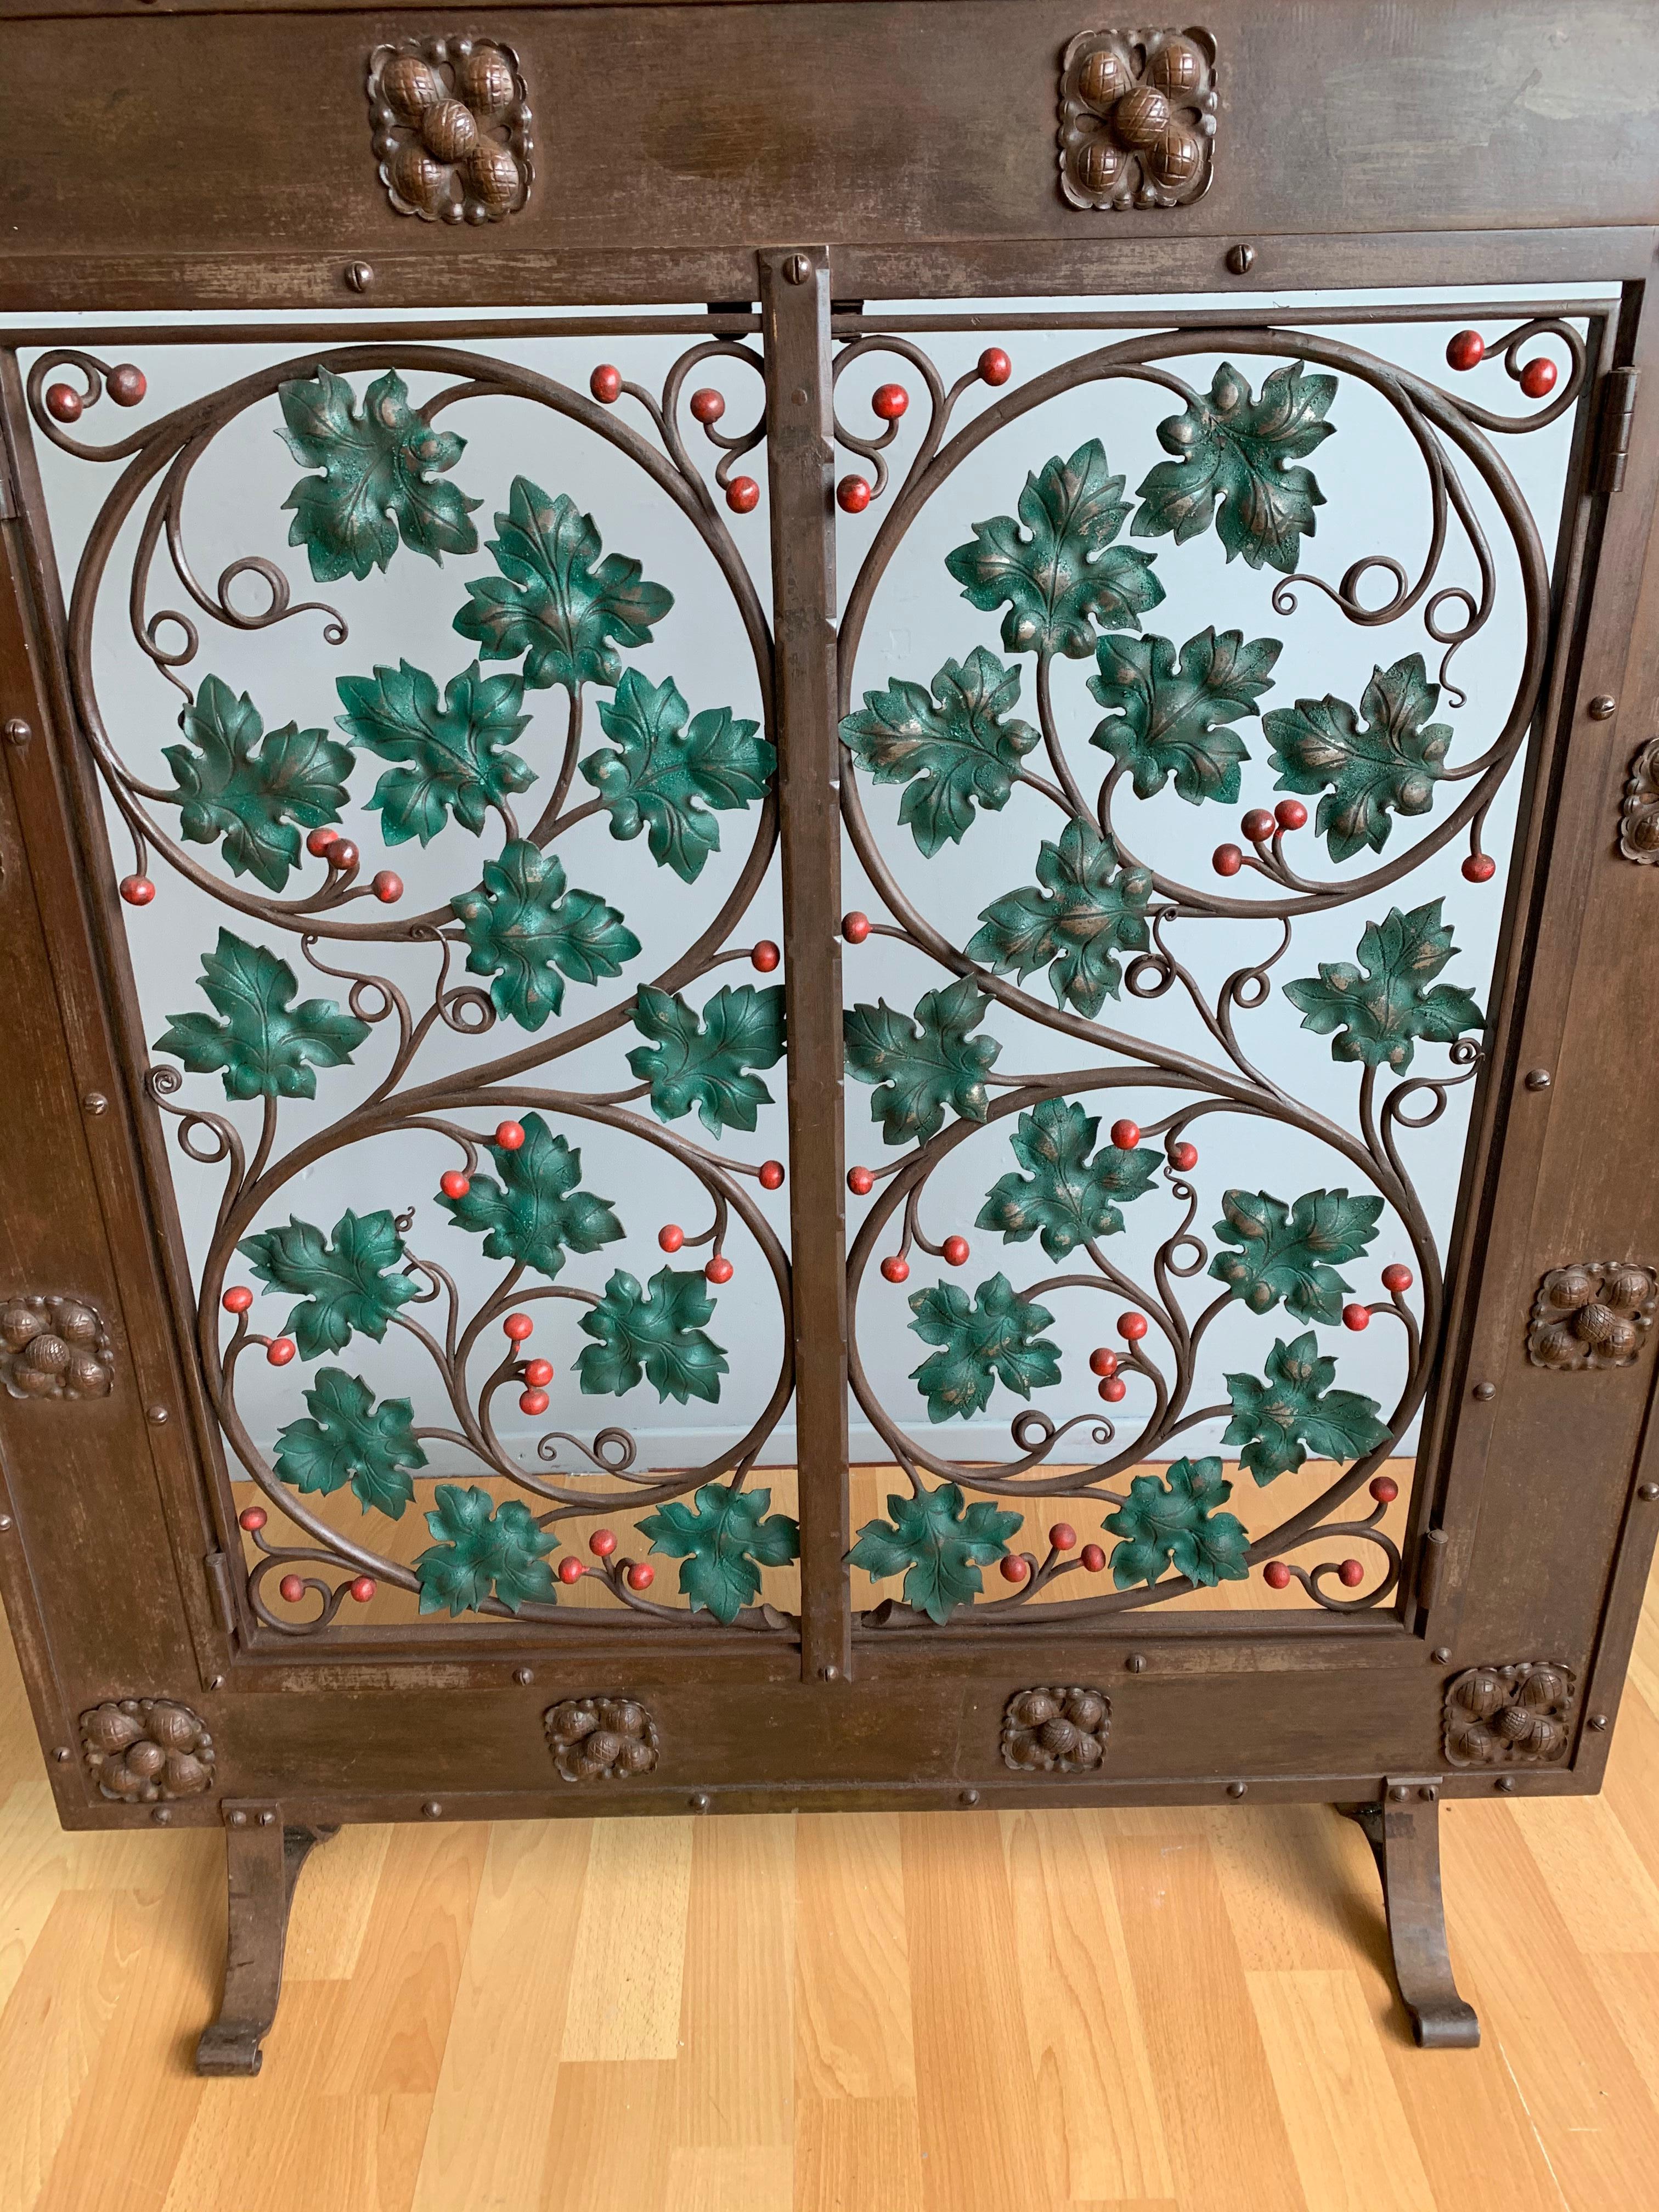 Early 20th Century Handcrafted Wrought Iron Firescreen with Branch & Leaf Decor 14